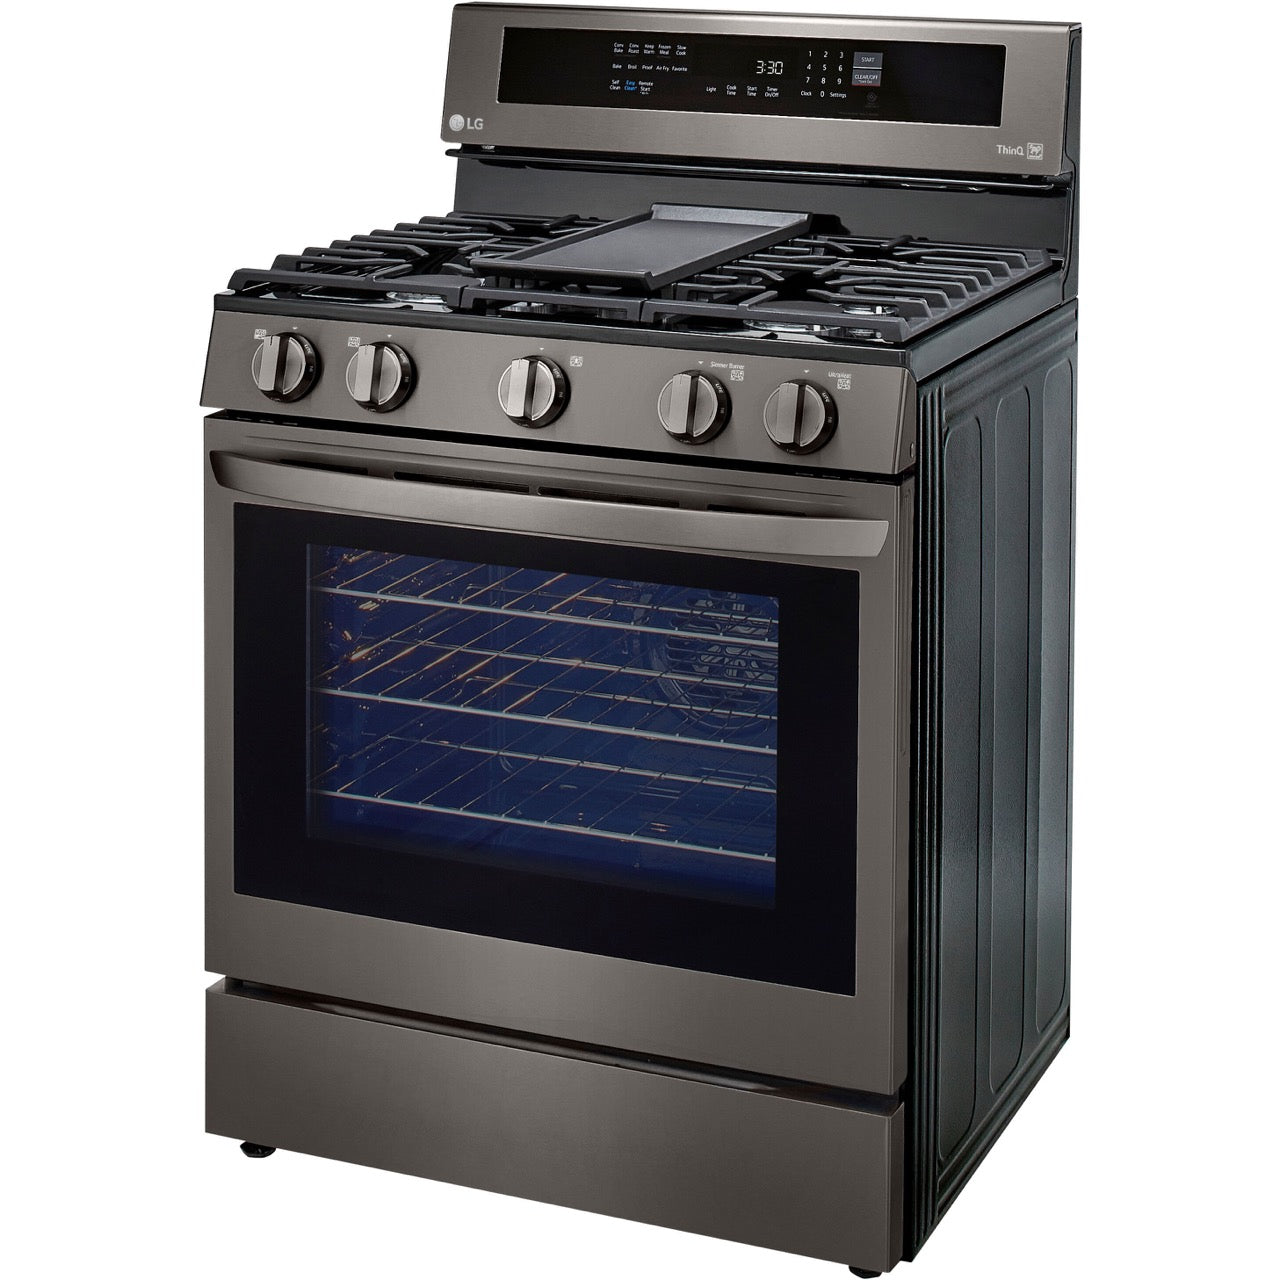 LG 5.8-Cu. Ft. Gas Convection Smart Range with AirFry and InstaView, Black Stainless Steel (LRGL5825D)